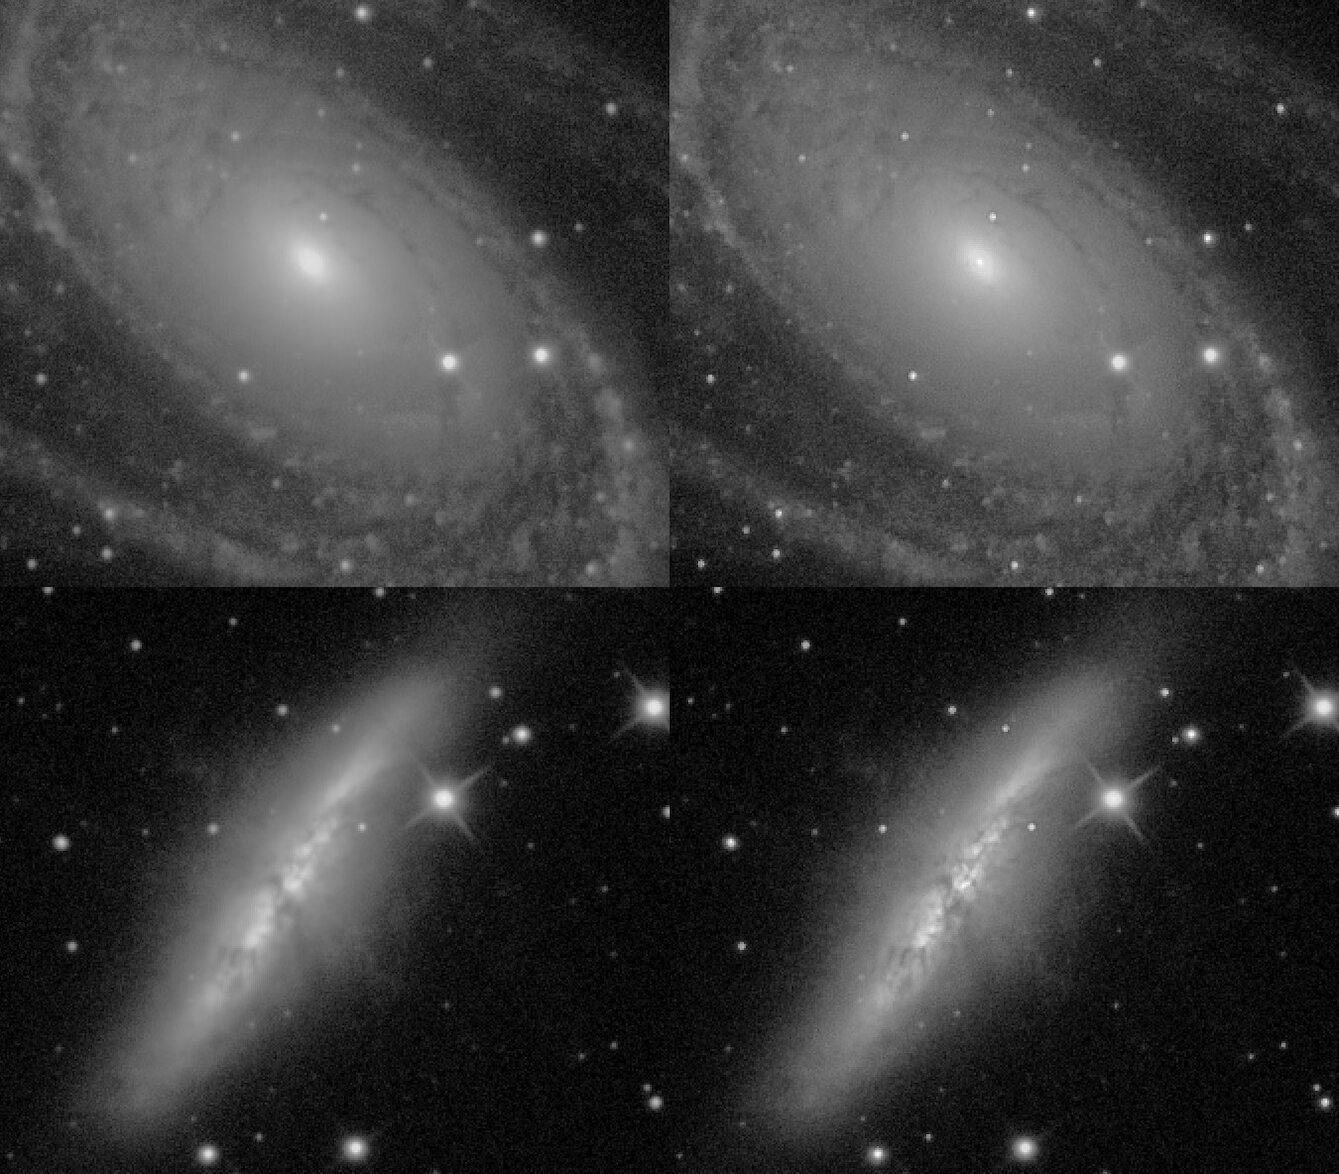 A 4-panel showing crops of the cores of M81 and M82 before and after deconvolution.